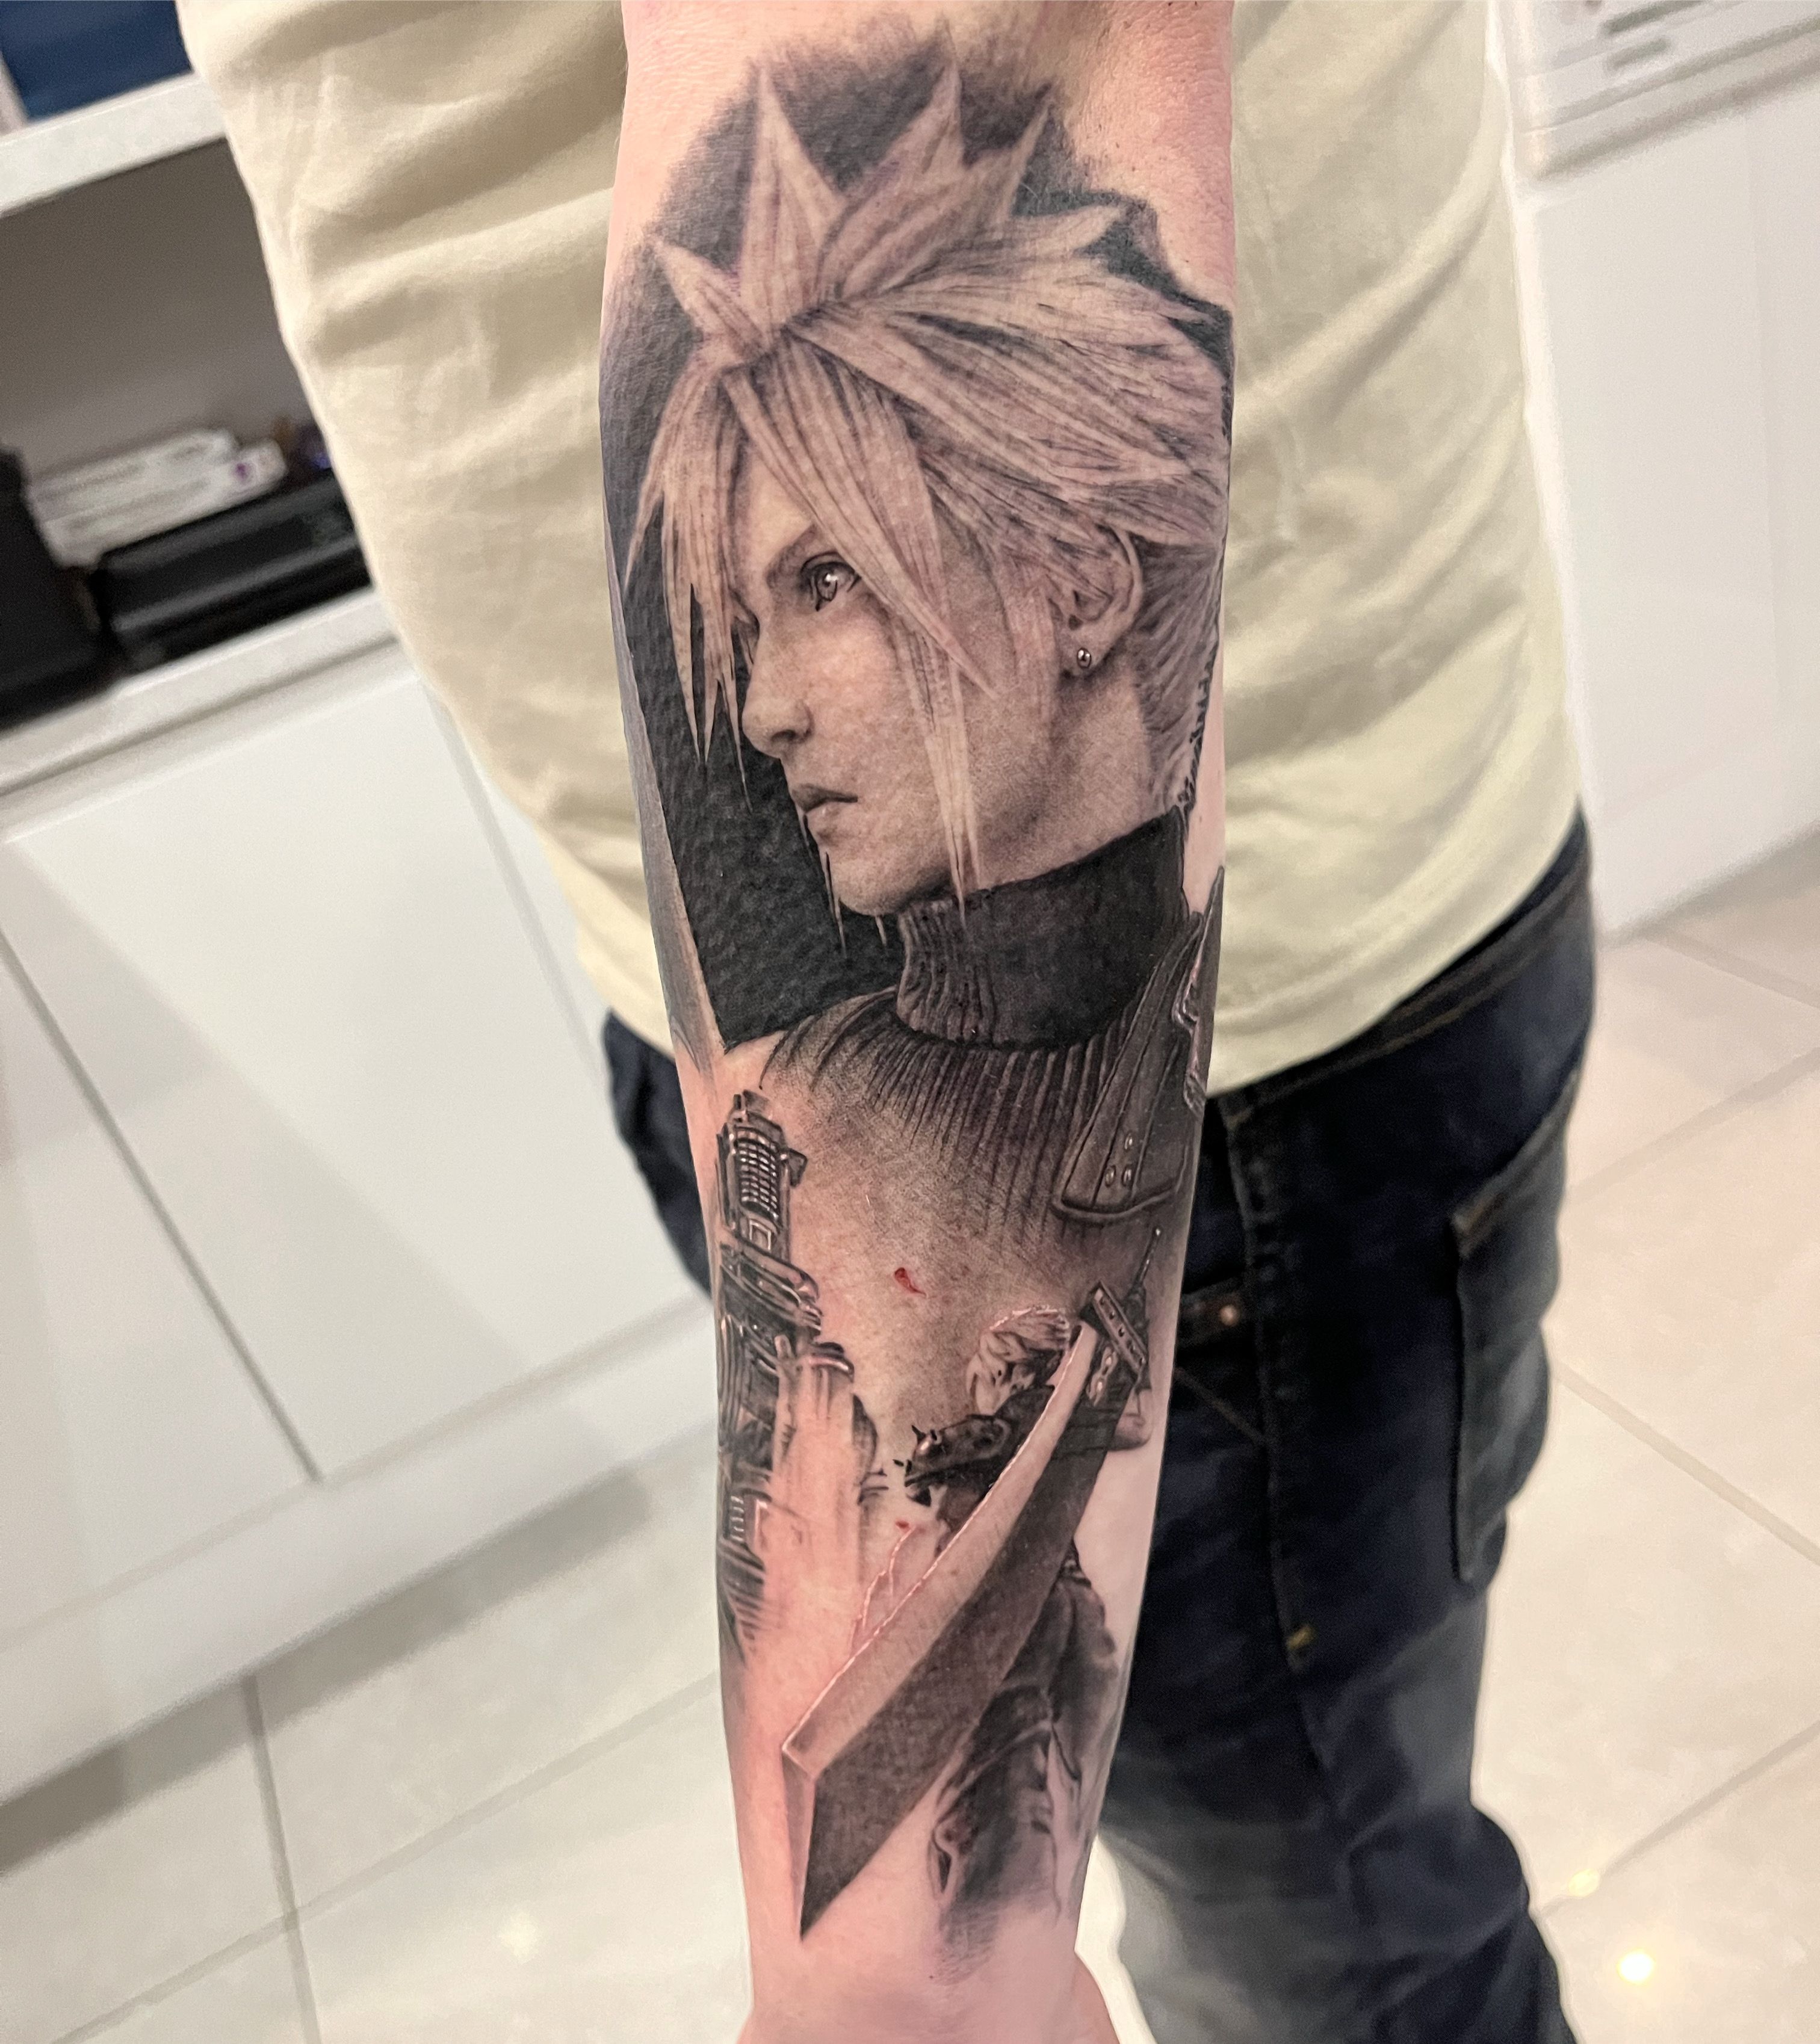 101 Awesome Final Fantasy Tattoo Designs You Need To See! | Final fantasy  tattoo, Tattoo designs, Fantasy tattoos